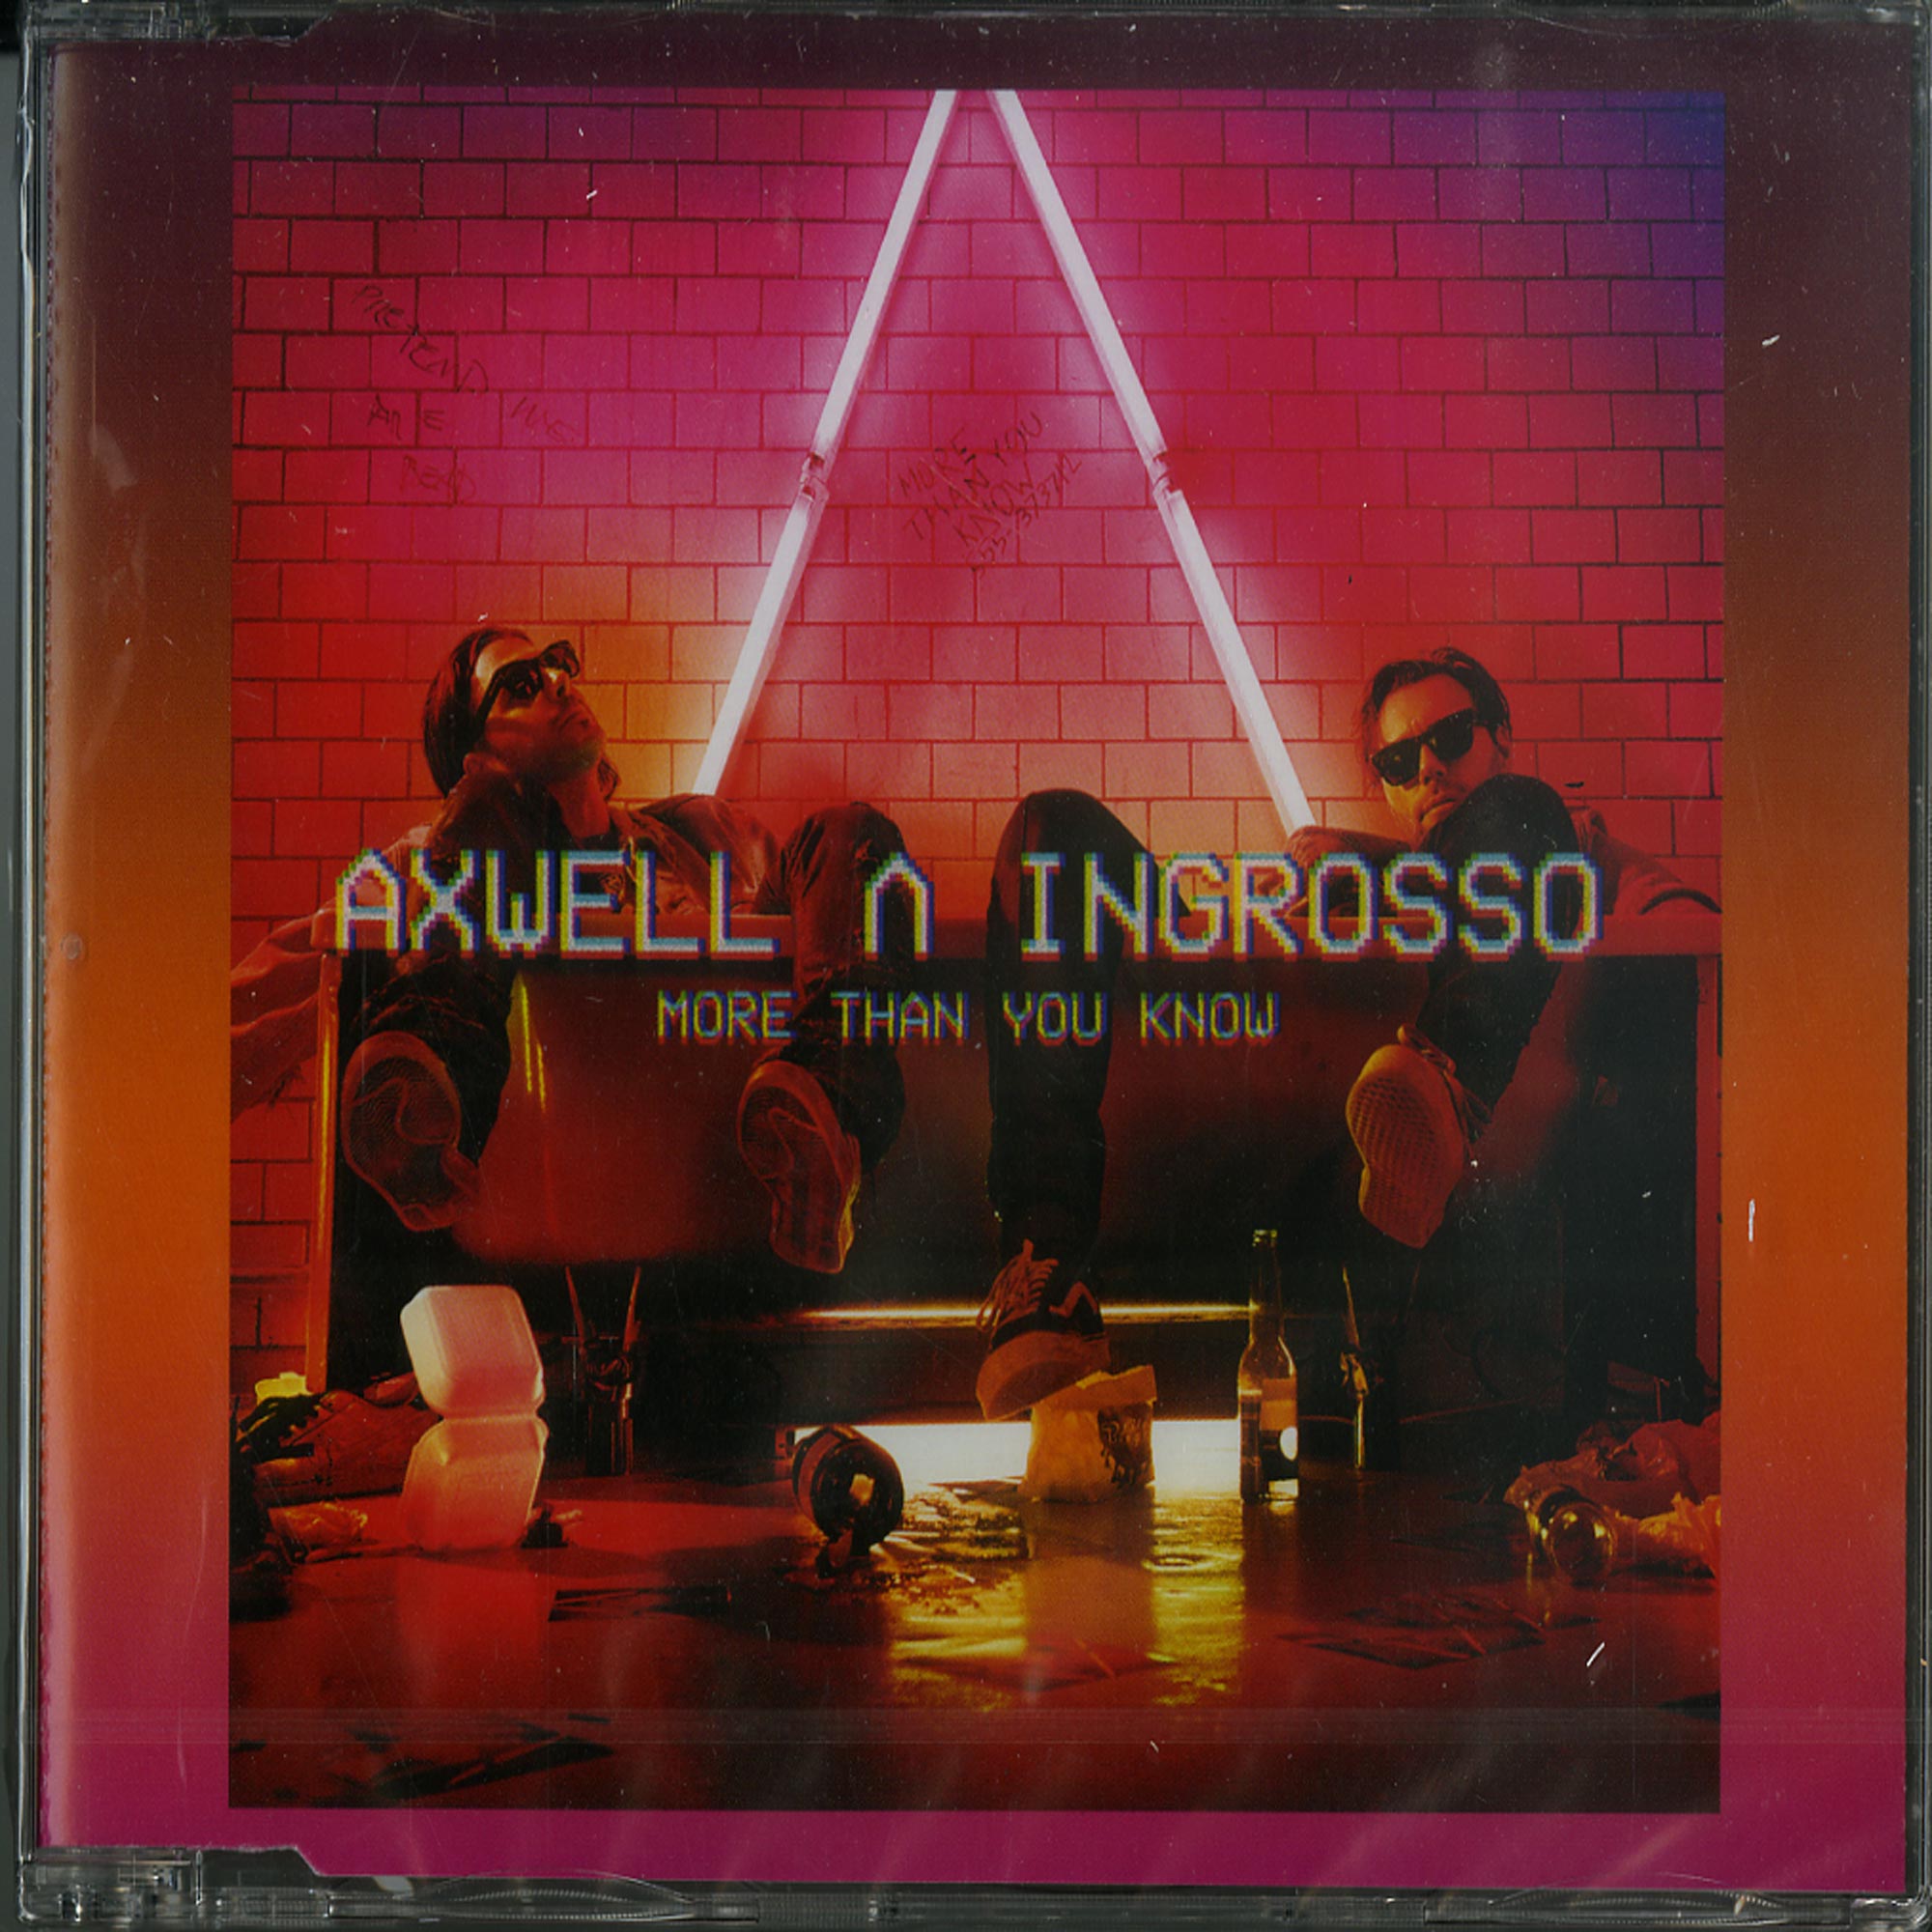 More than you know Axwell ingrosso. Axwell λ ingrosso - more than you know. Axwell ingrosso обложка альбома. Axwell ingrosso on my way. Axwell more than you